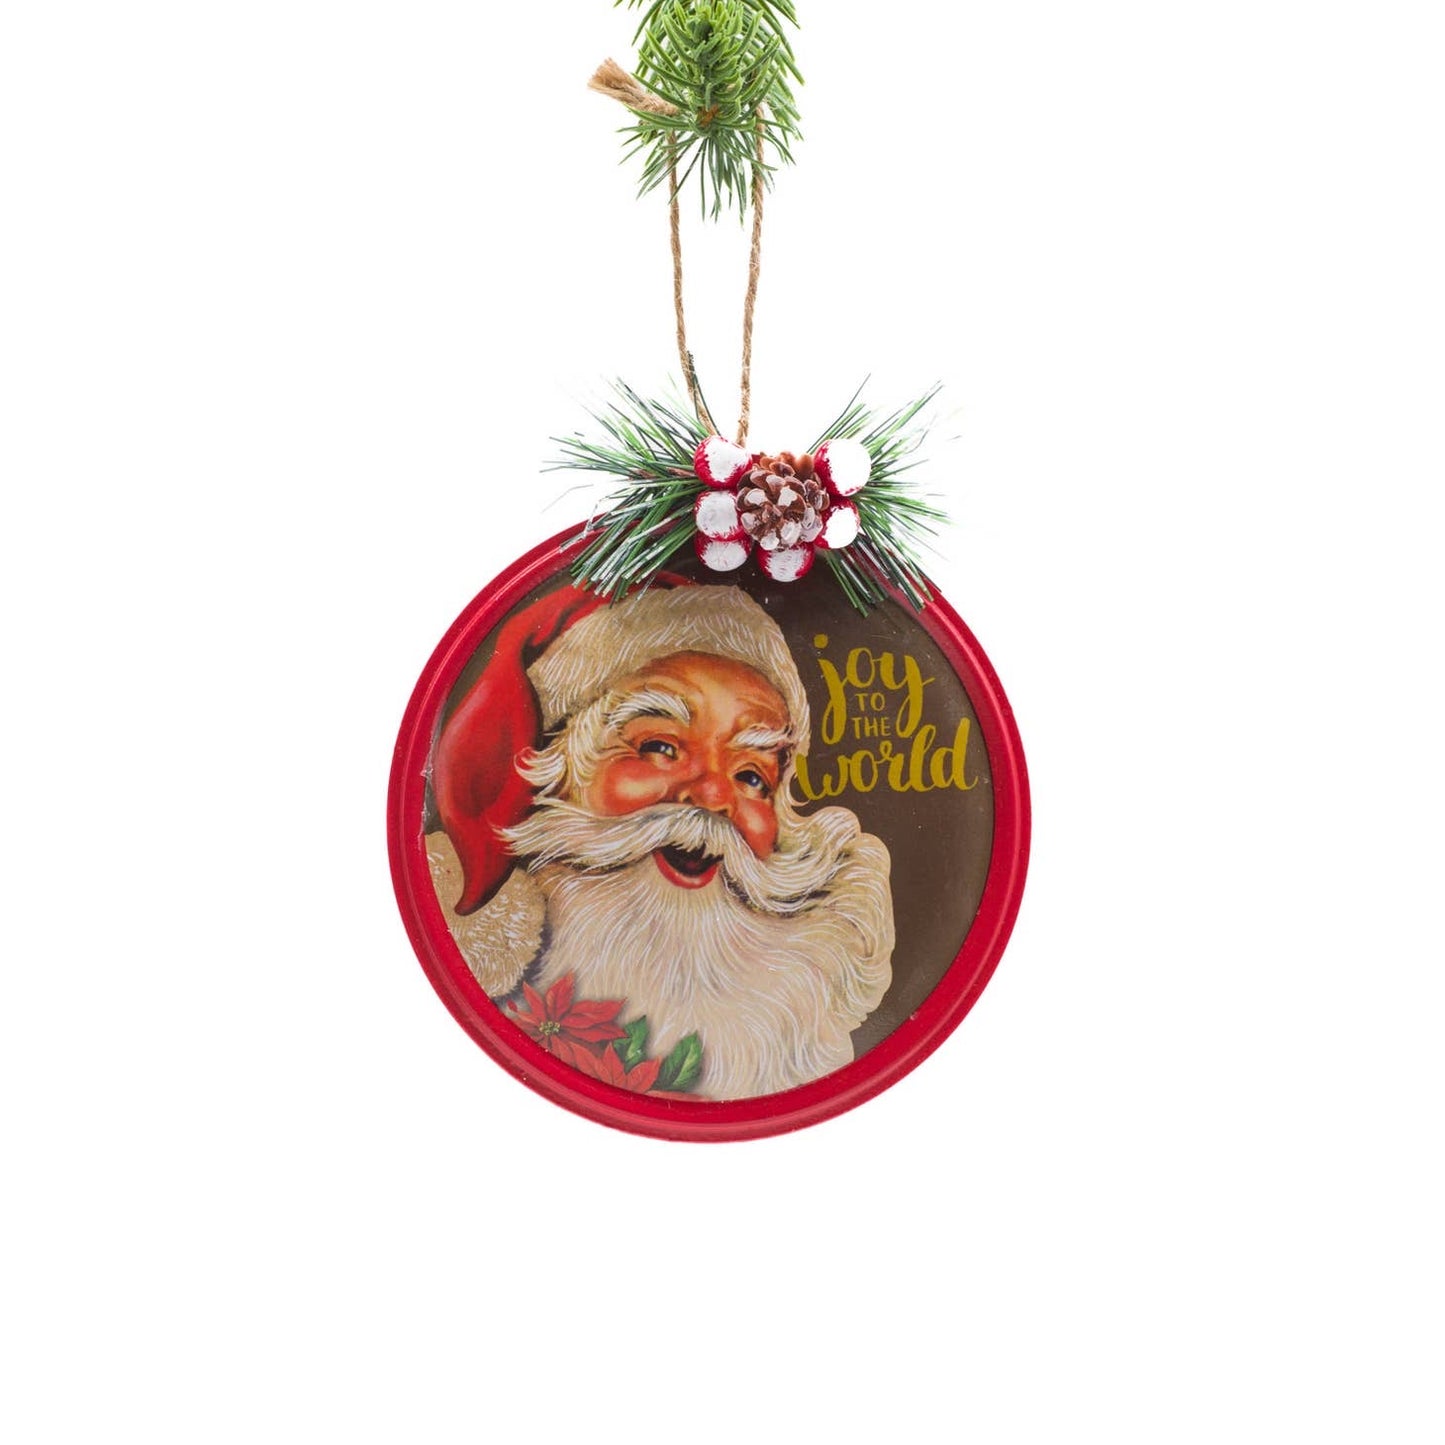 Red Tin Ornament with Beautiful Vintage Santa, Sentiment joy to the world 